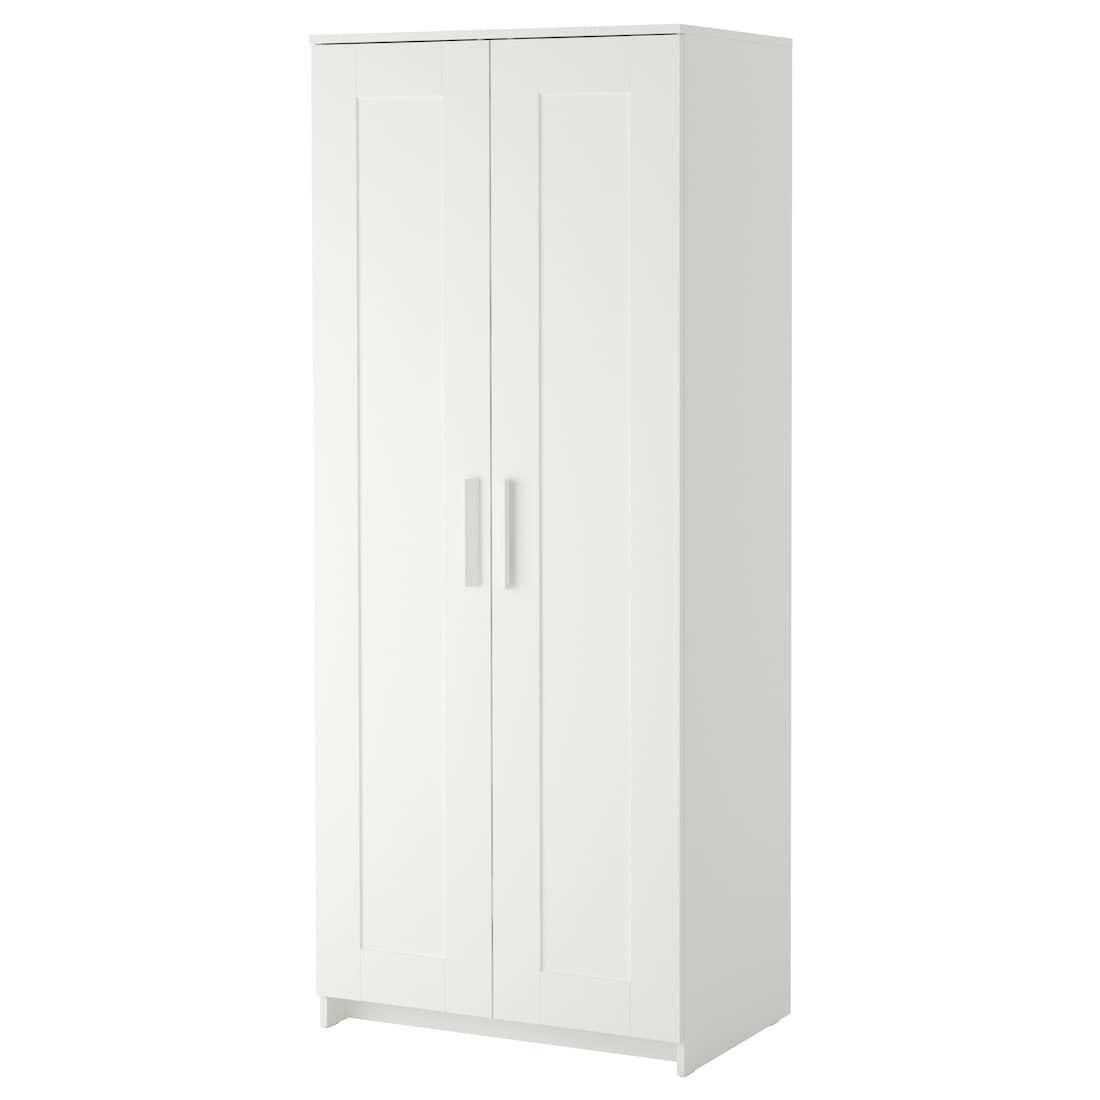 White Closet Wardrobe with Hanging rod and shelves, Brimnes